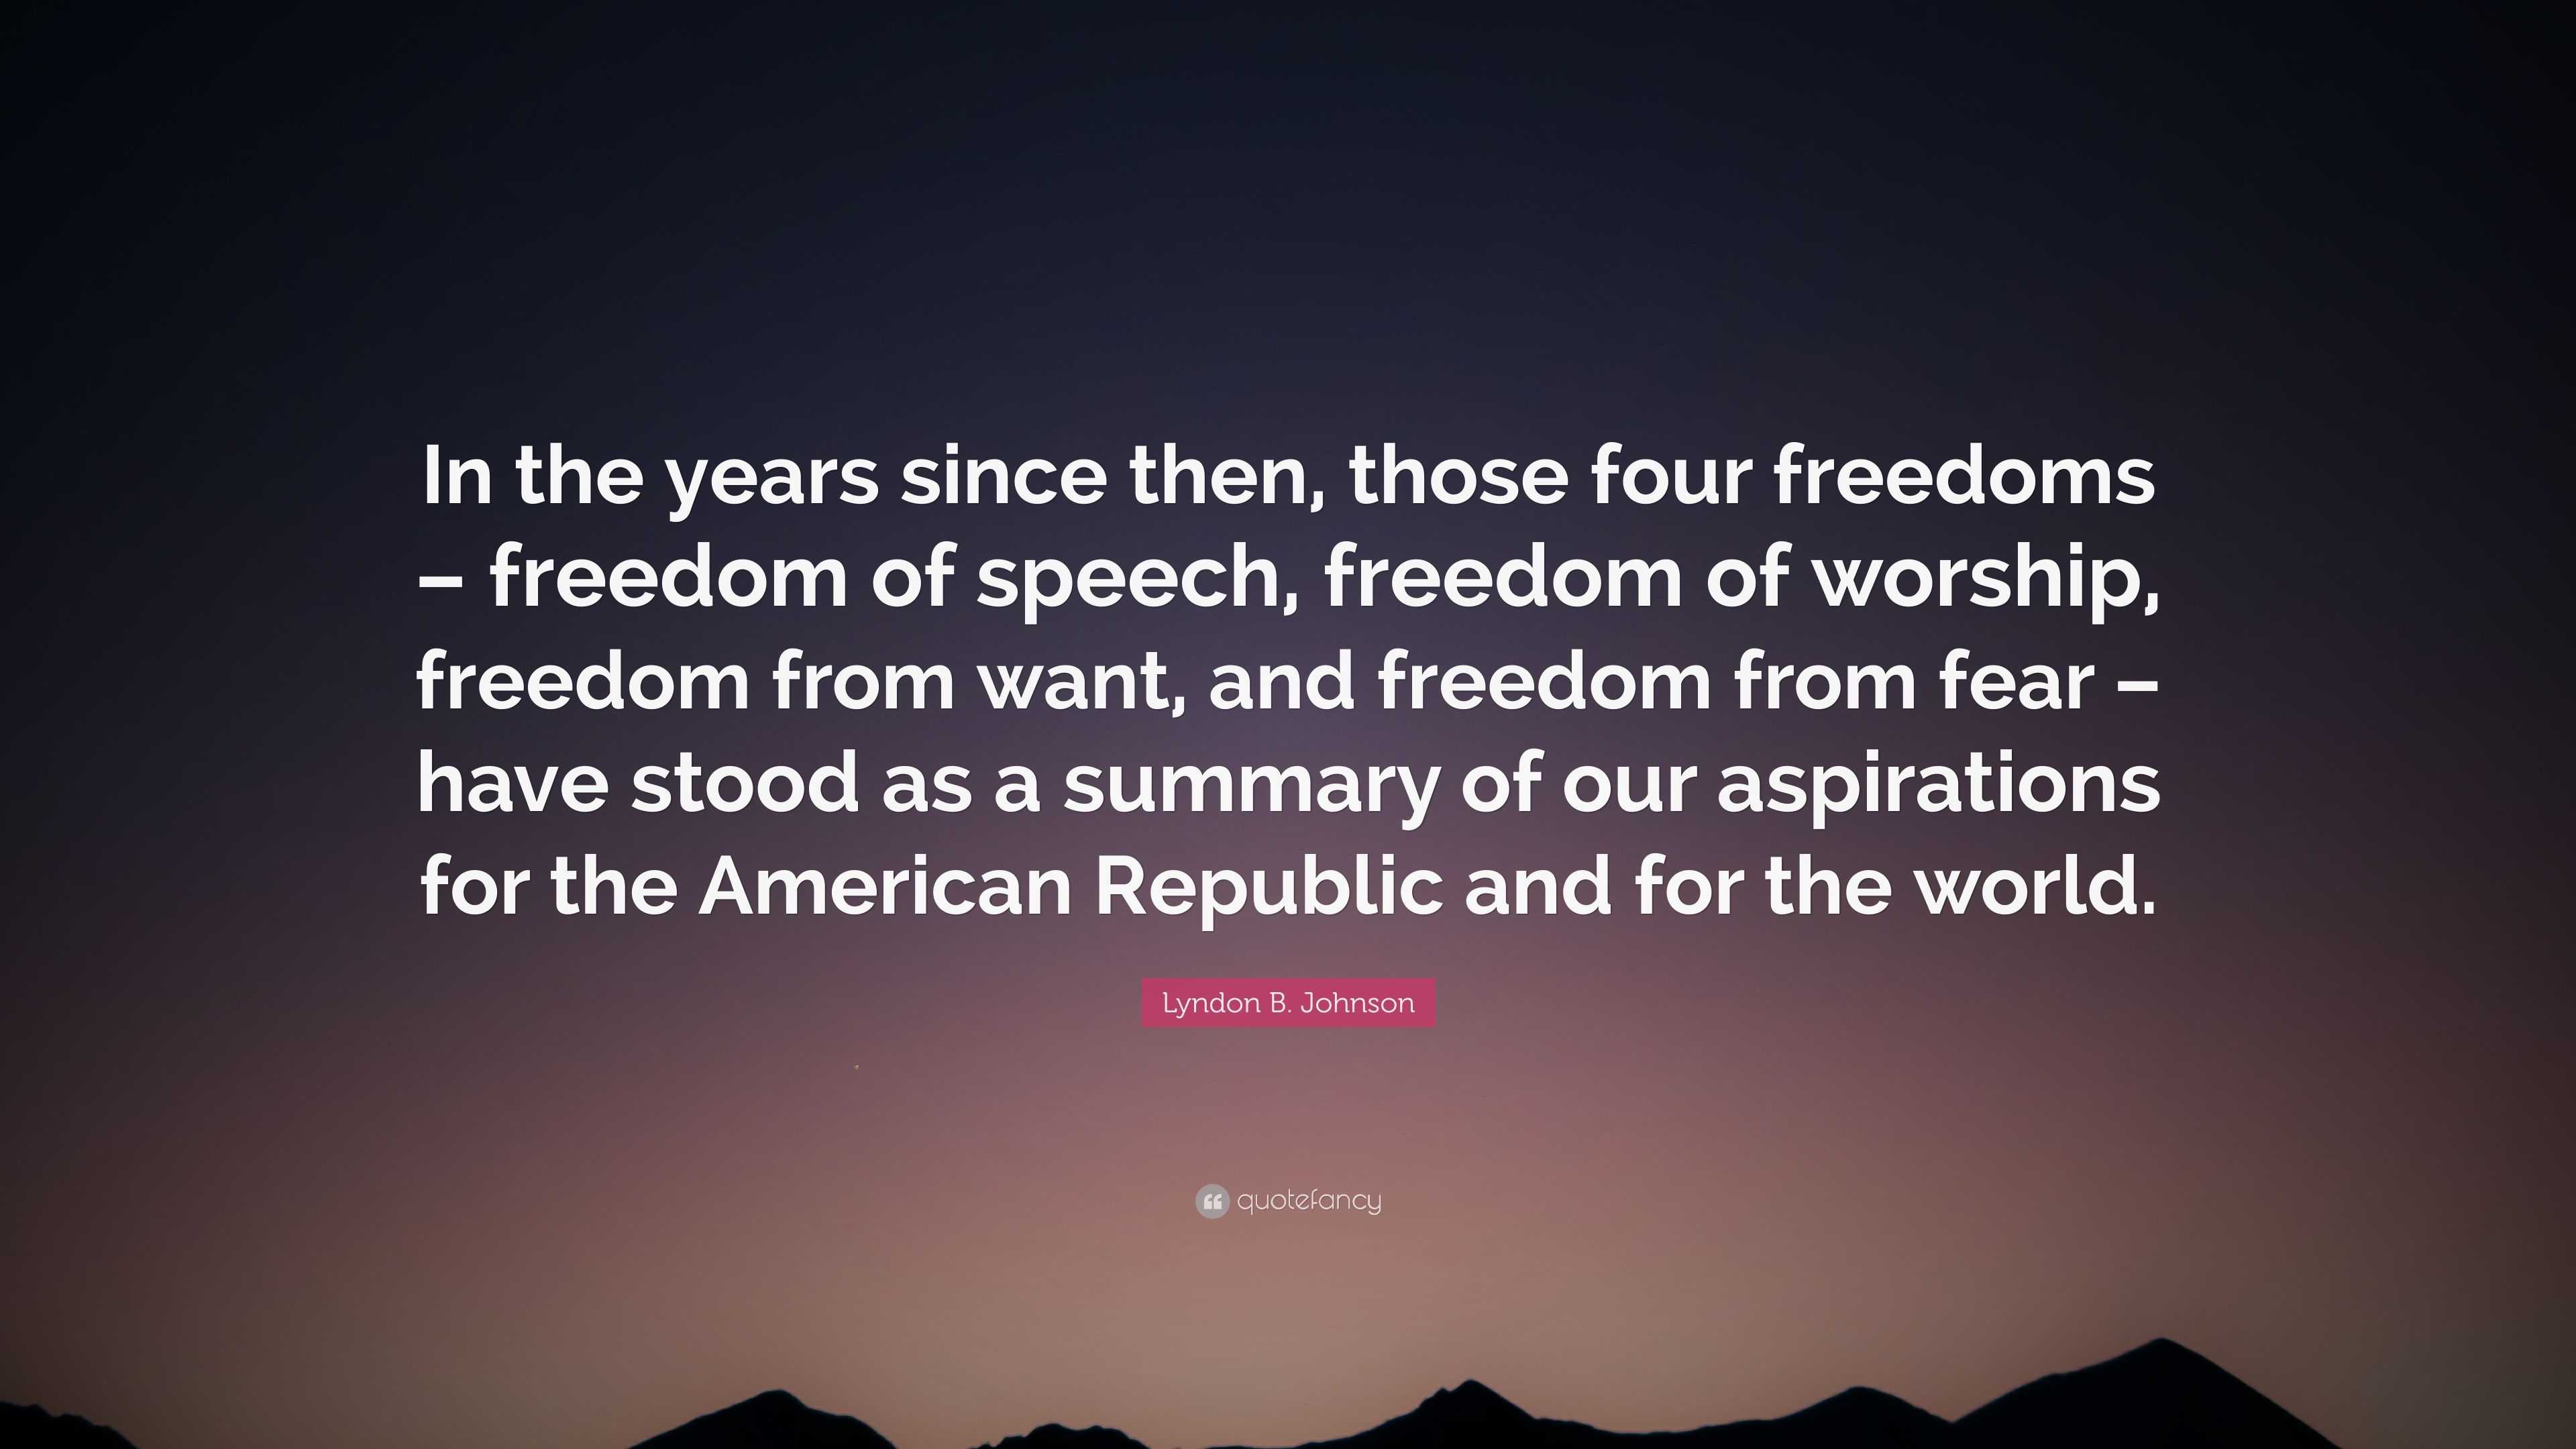 what was the purpose of the four freedoms speech